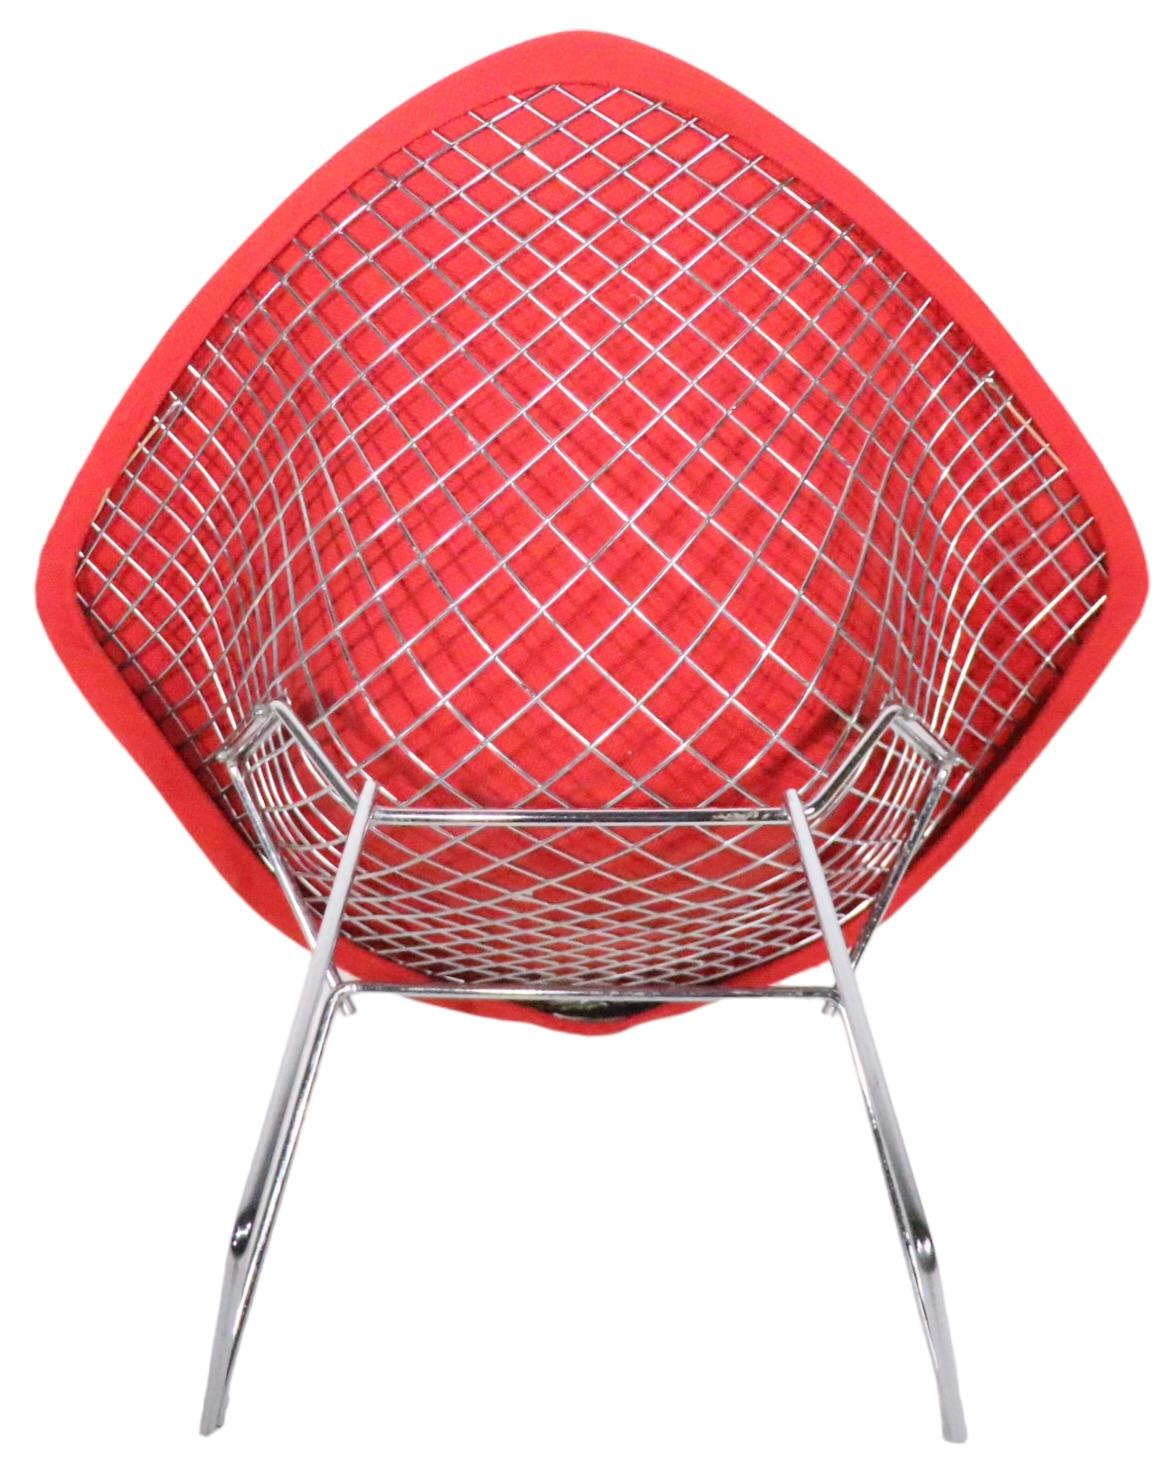 Iconic Diamond chair designed by Harry Bertoia for Knoll. This example was executed in the chrome plated finish, and comes with its original Knoll full pad cover ( somewhat crunchy but not worn ). The chair retain remnants of the Knoll Park Ave. New